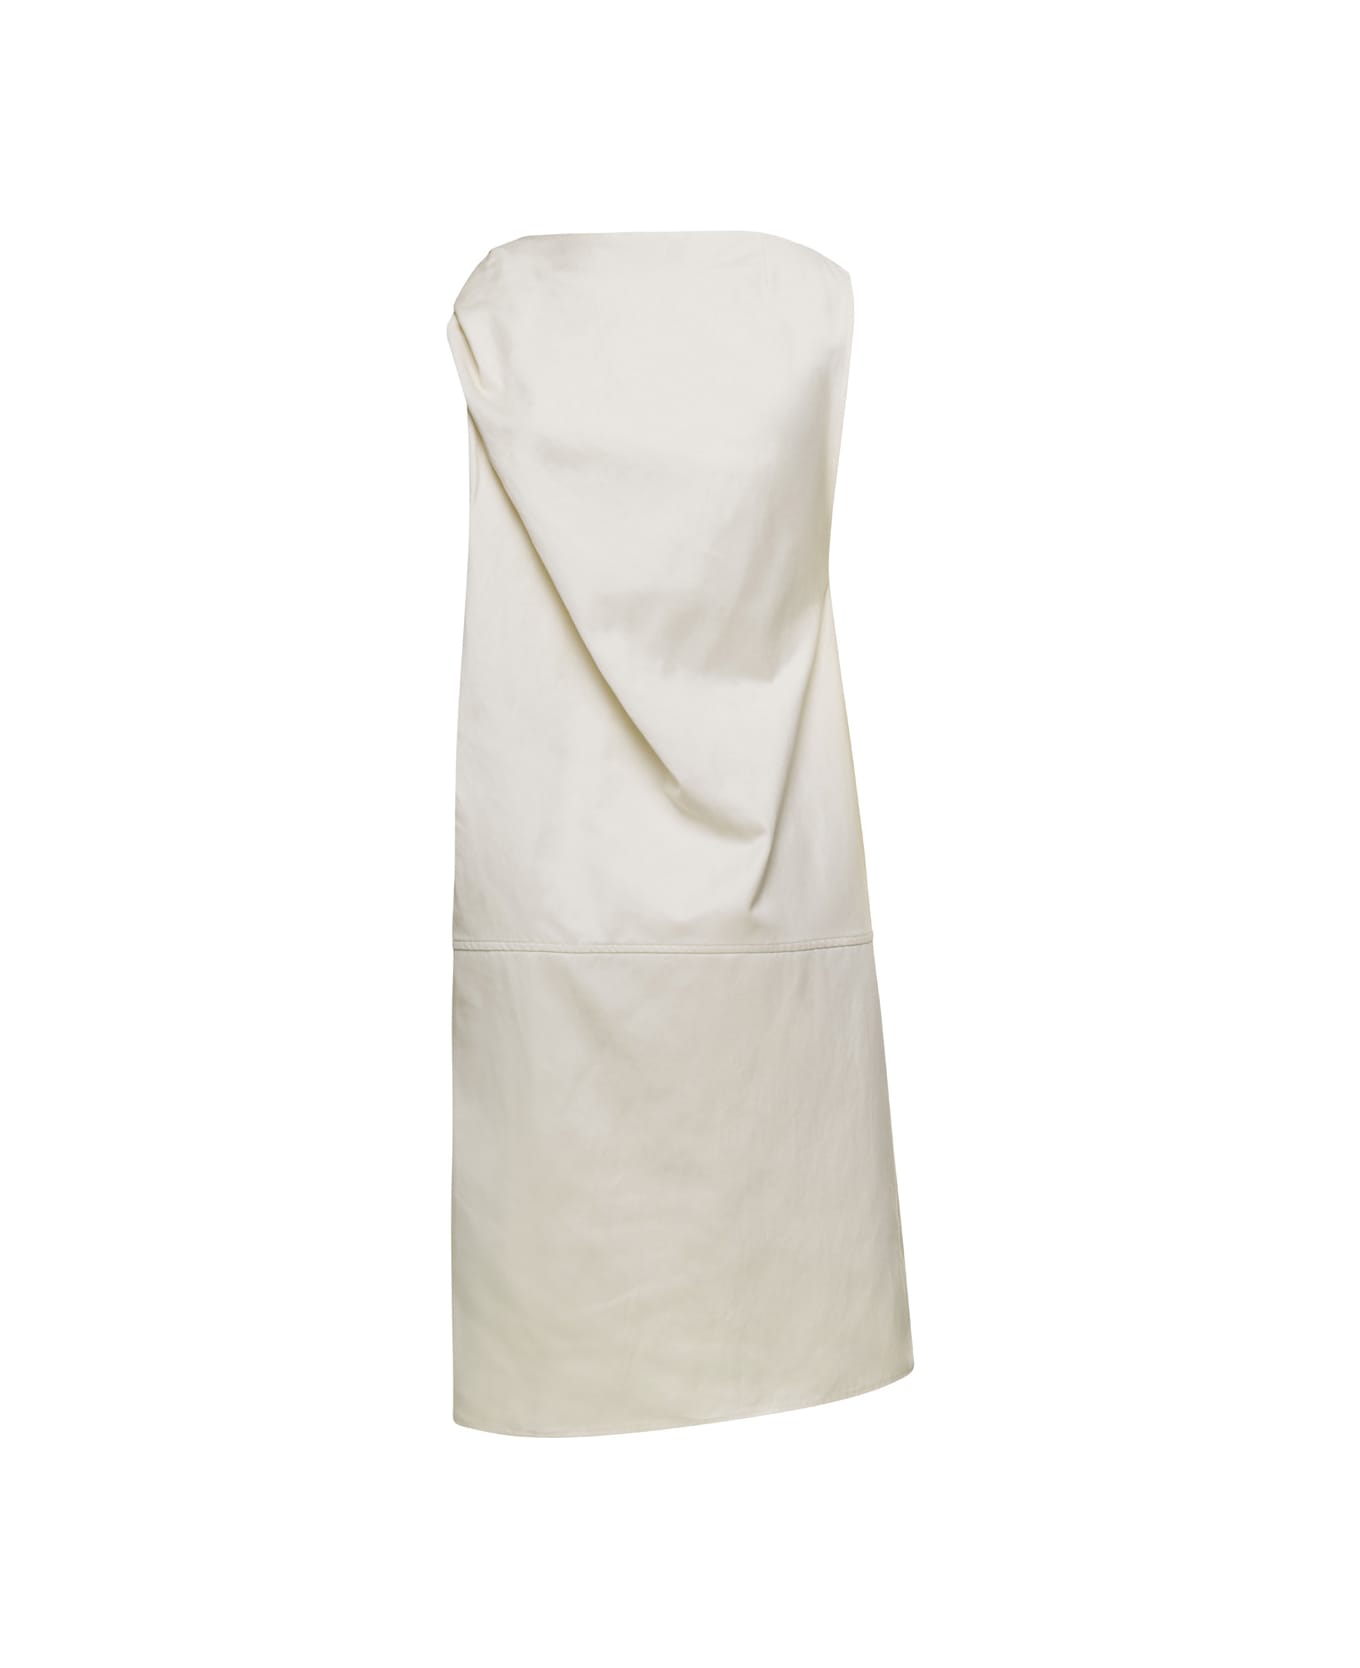 Totême Mini White Dress With Gathering On Shoulder In Cotton Blend Woman - White